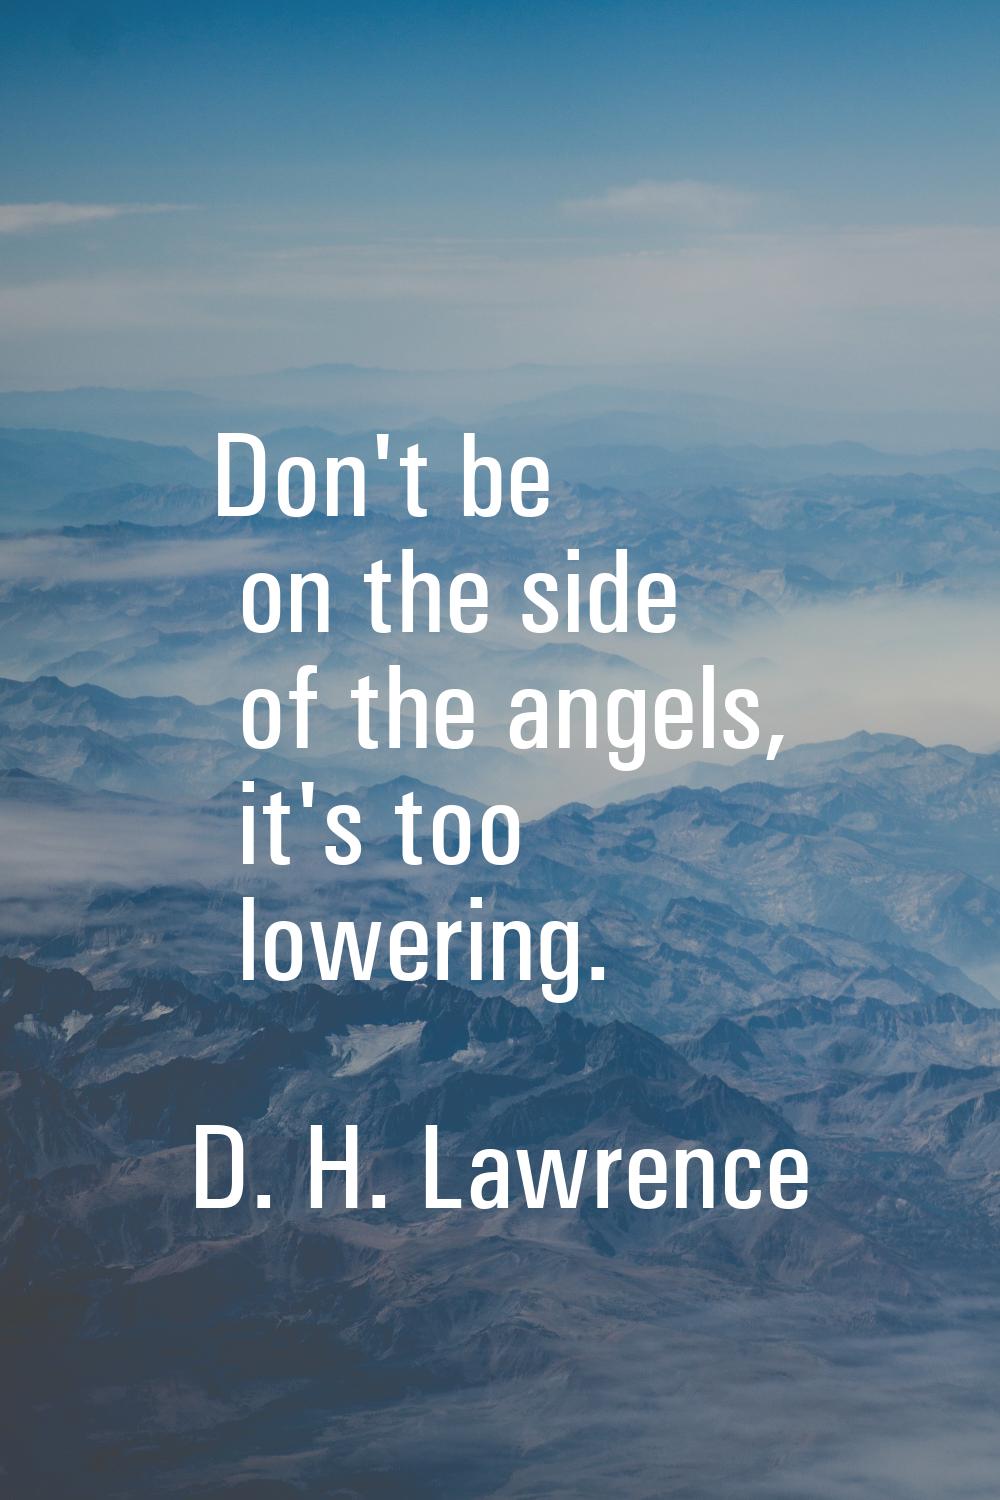 Don't be on the side of the angels, it's too lowering.